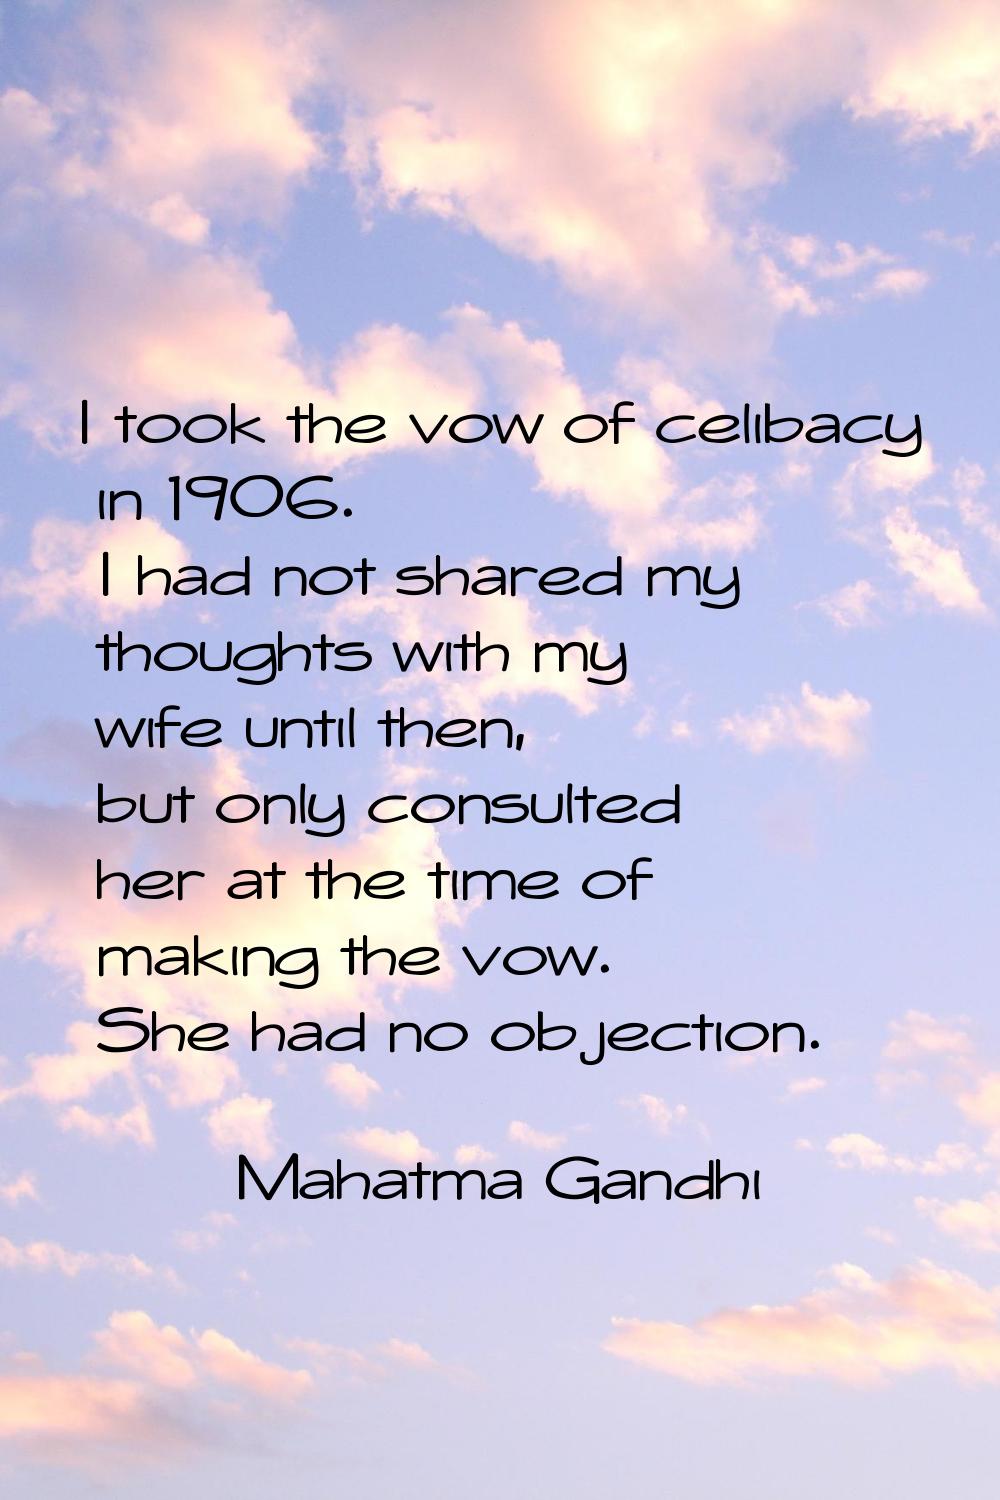 I took the vow of celibacy in 1906. I had not shared my thoughts with my wife until then, but only 